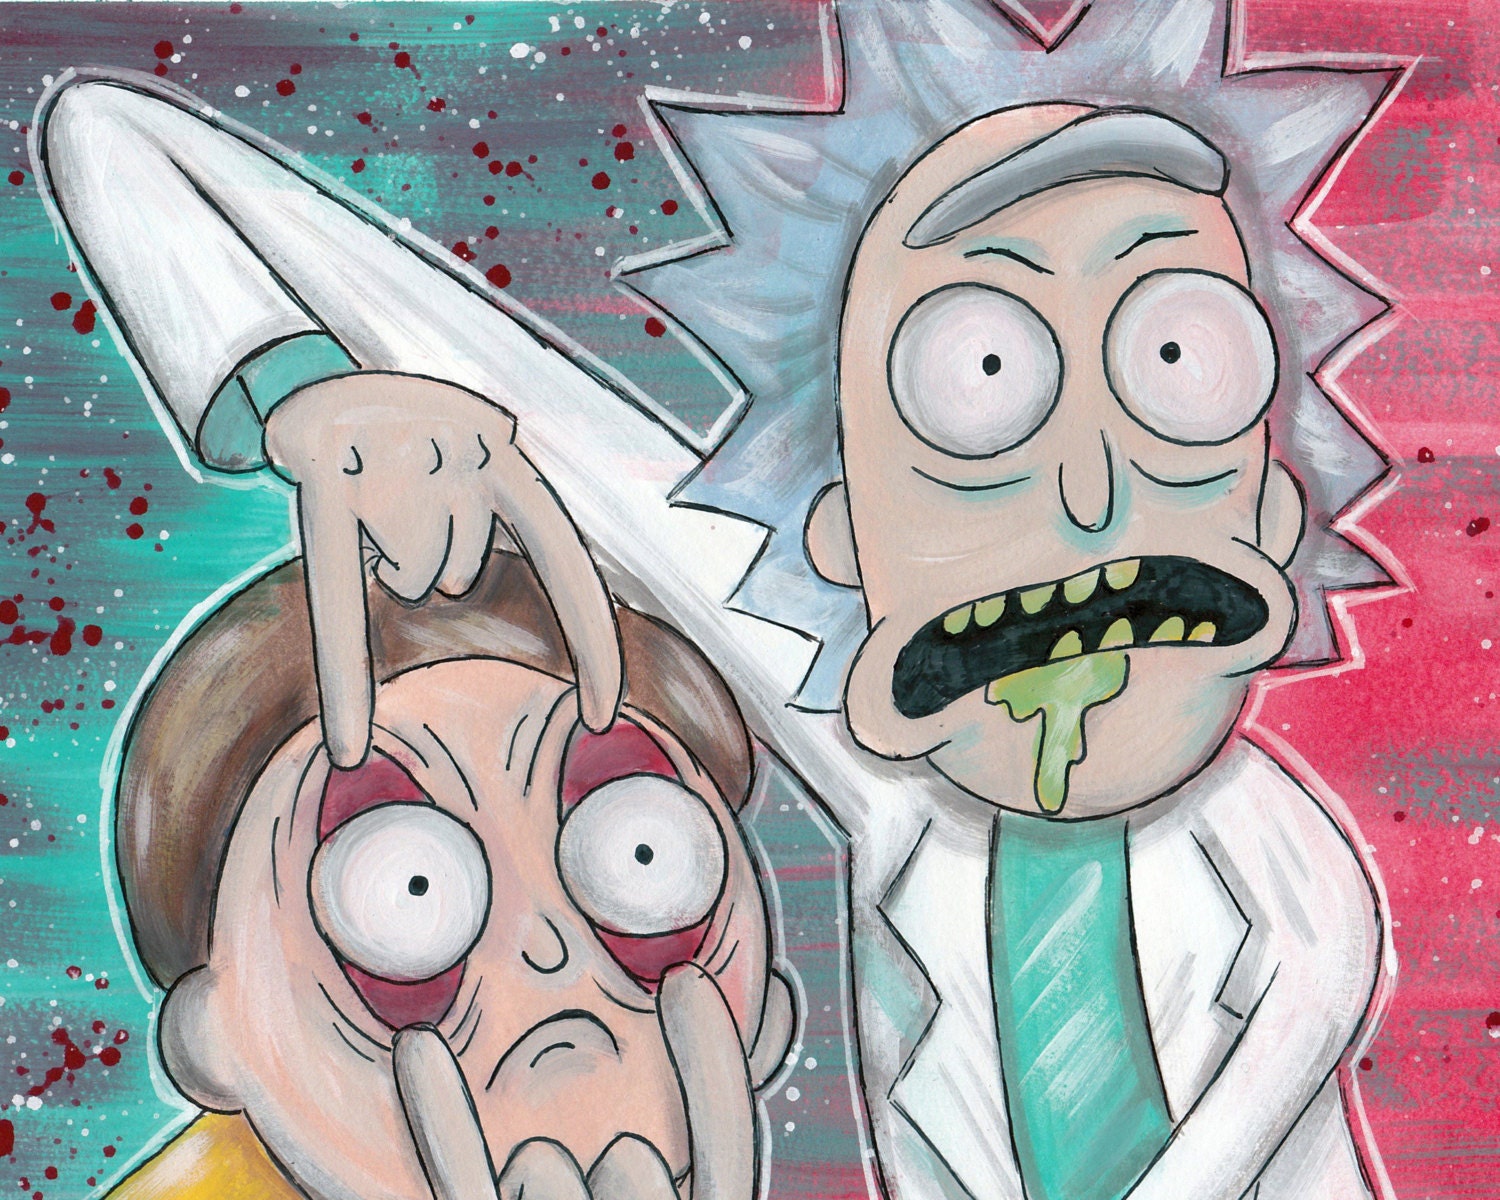 Rick And Morty Tv Show Cartoon Animation Art Print 8x10 Inches 0710